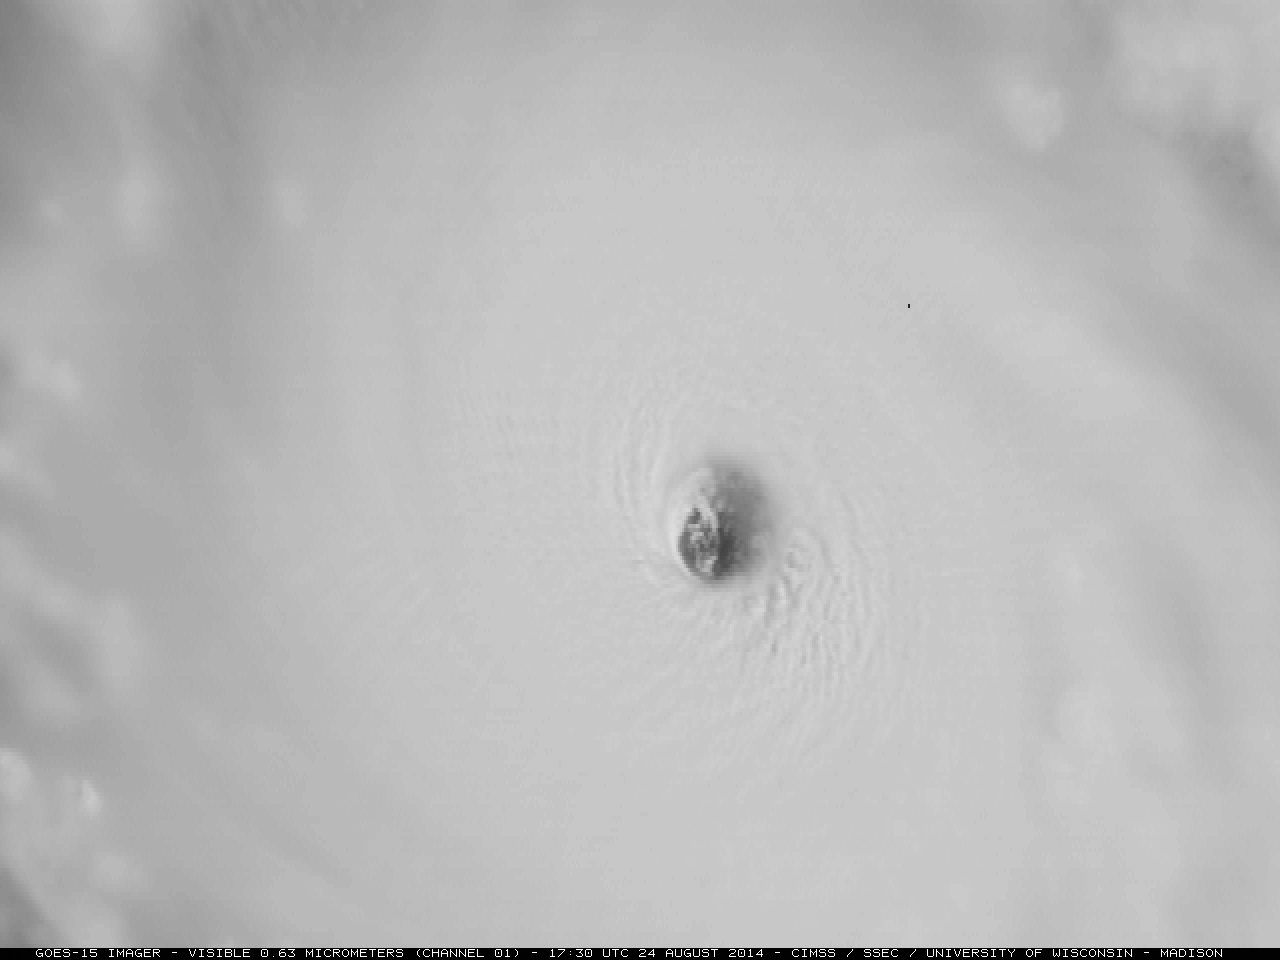 GOES-15 0.63 µm visible channel images (click to play Animated GIF)